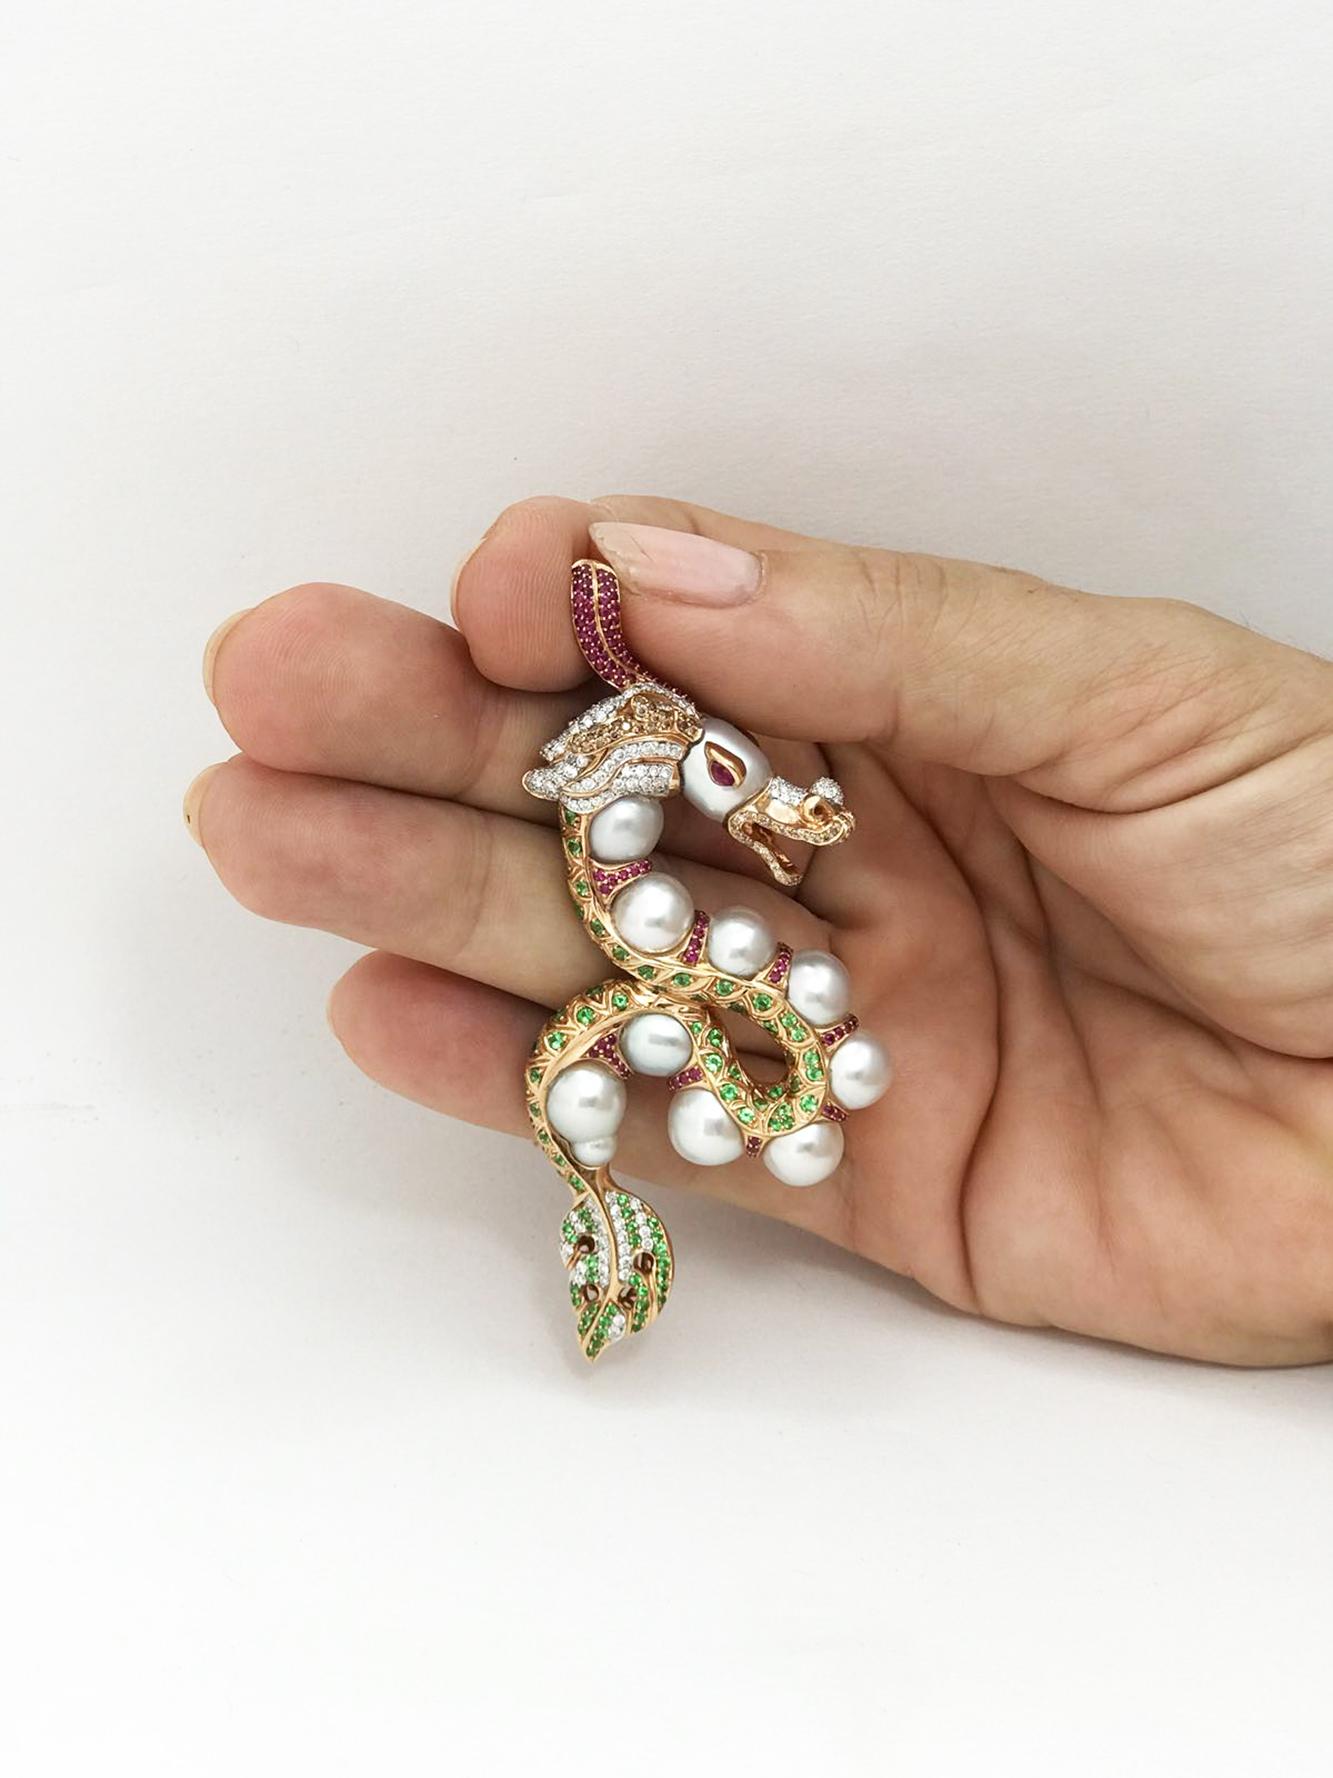 This unique one of a kind Dragon pendant has been crafted using lustrous  baby Australian south sea pearls, 10 pieces, measuring 8-9 mm.  The Dragon has been set with carefully selected red rubies, green tsavorites, brown and white diamonds.  Its a